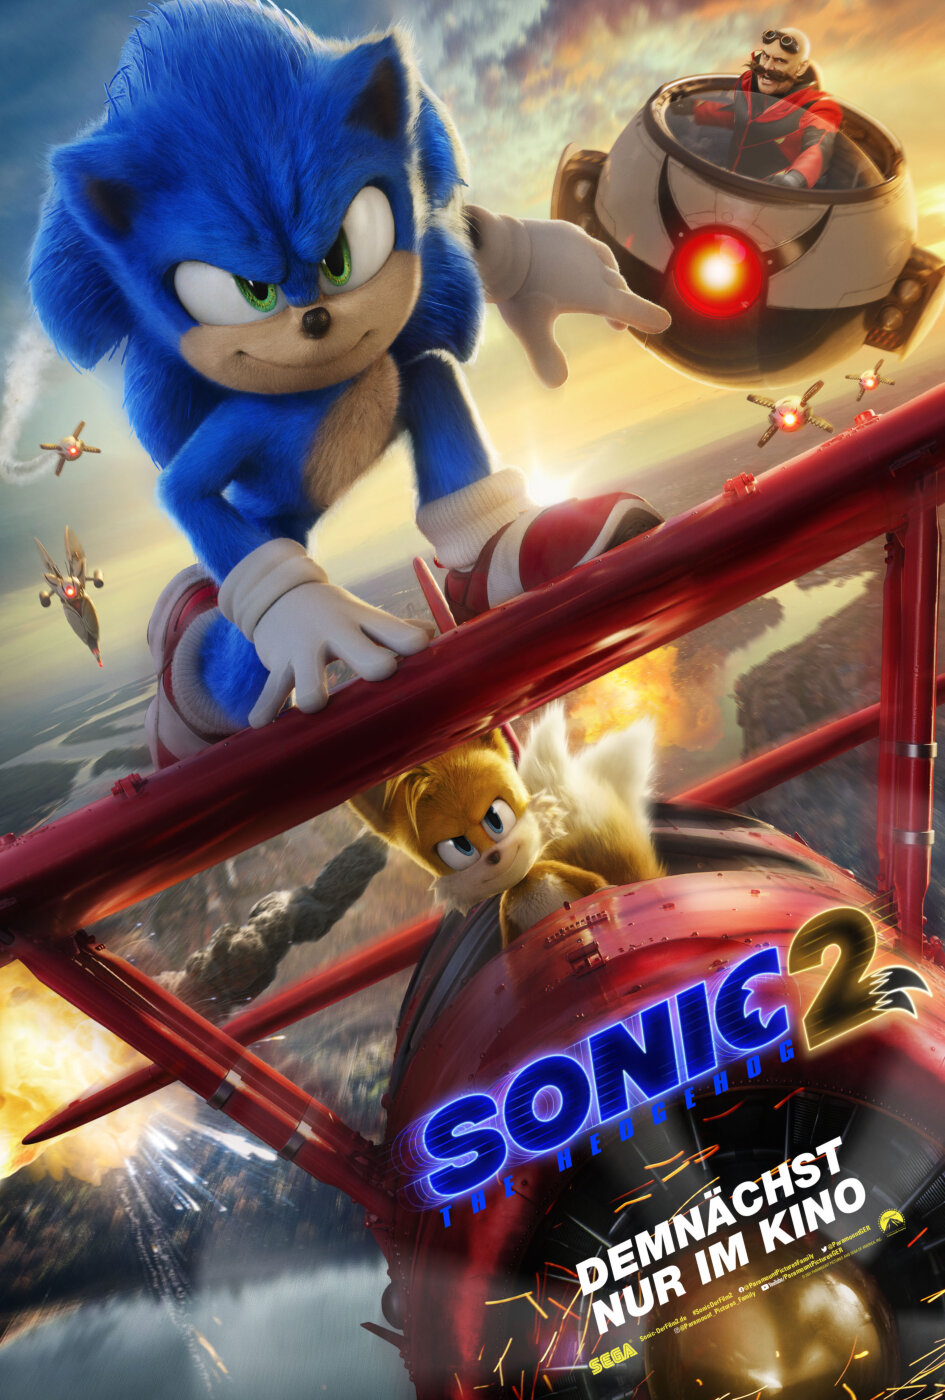 Sonic the Hedgehog 2 Trailer & Poster